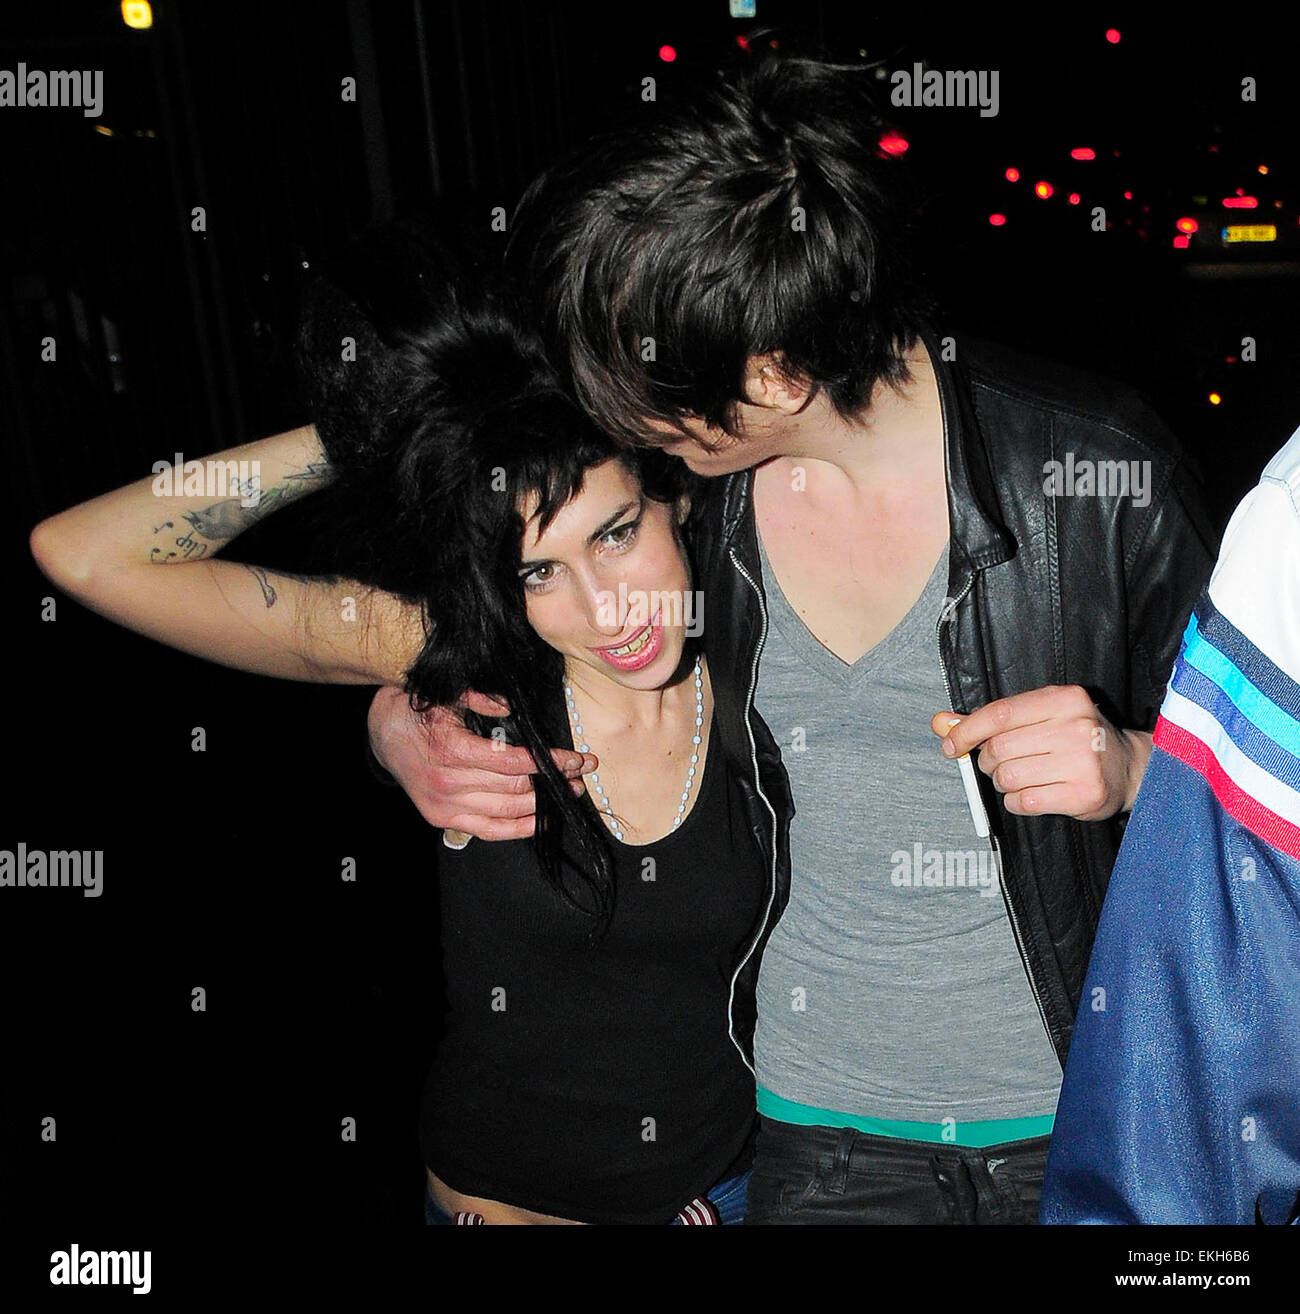 24.APRIL.2008. LONDON A DRUNK AND DISORIENTATED AMY WINEHOUSE Stock ...